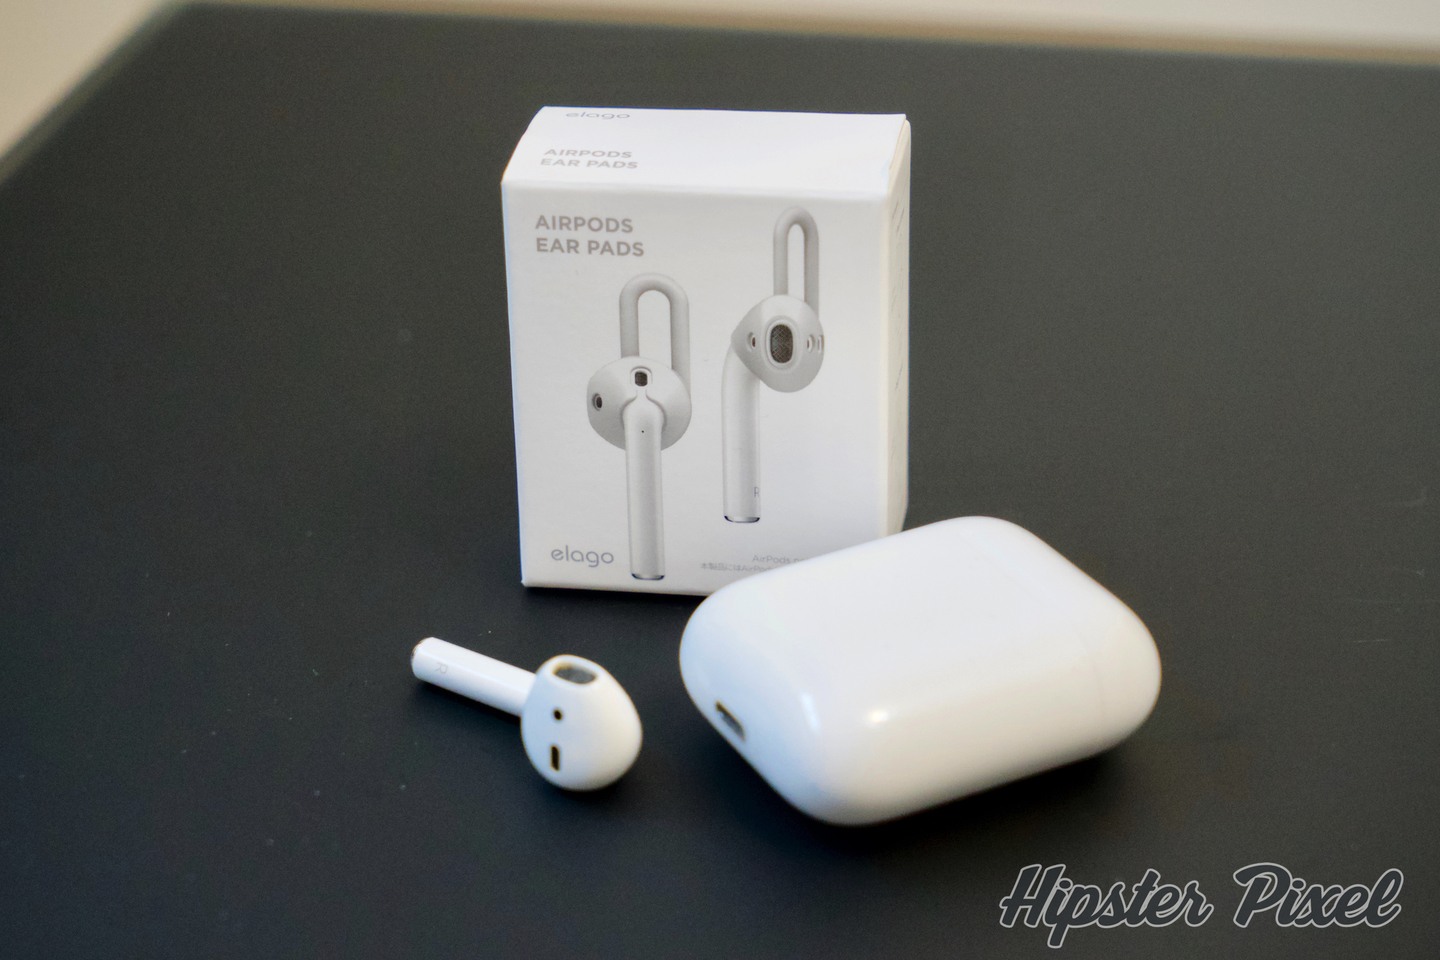 elago AirPods EarPads Review